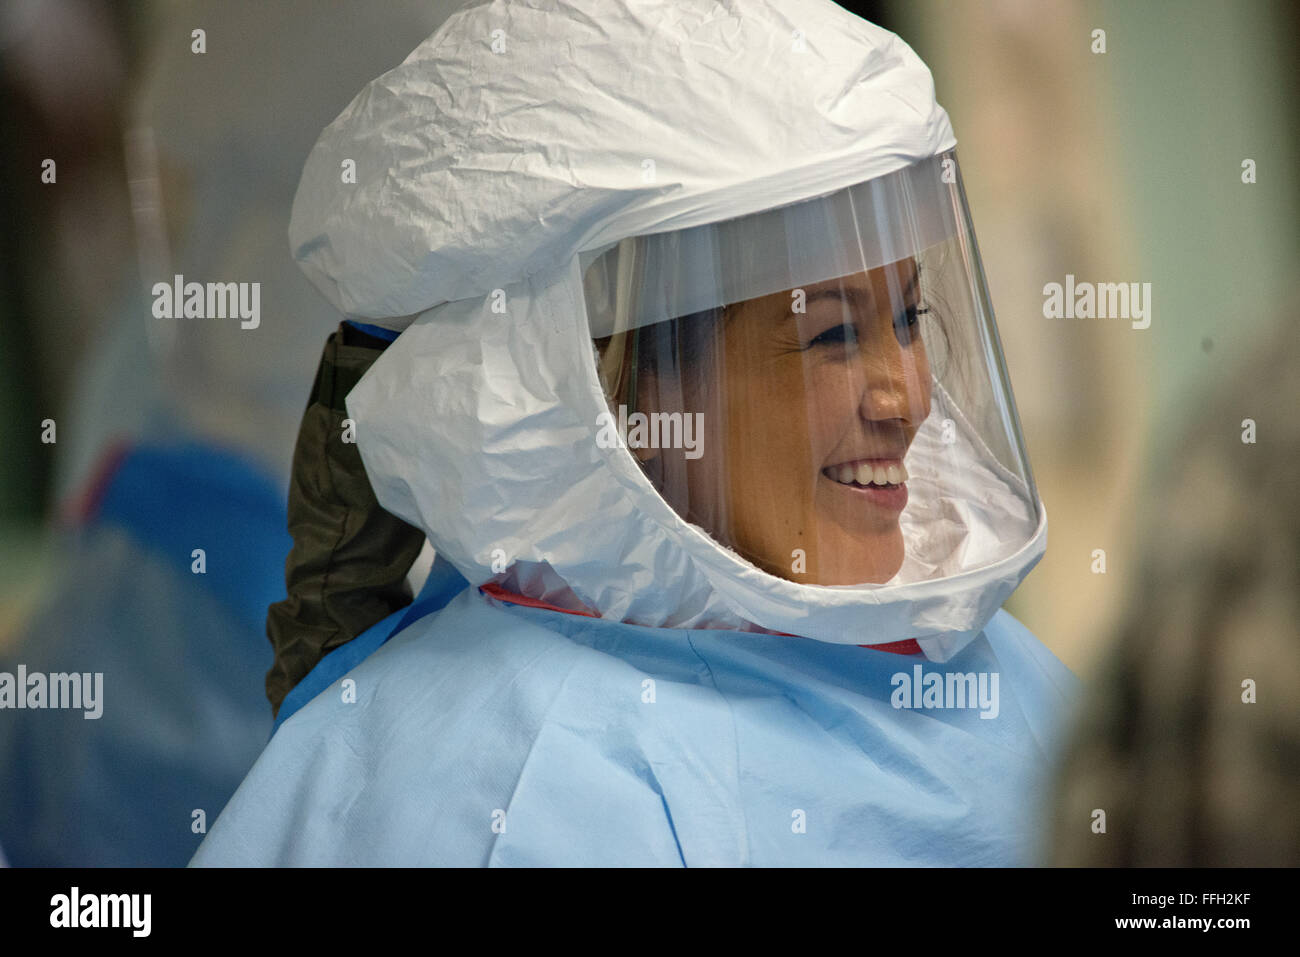 Capt. Tanya Tsosie watches teammates don their personal protective equipment during a week-long training program at the San Antonio Military Medical Center in San Antonio. Tsosie is one of 30 military members assigned to an Ebola medical support team designed to provide provide short-notice assistance to civilian medical professionals in the United States. Stock Photo